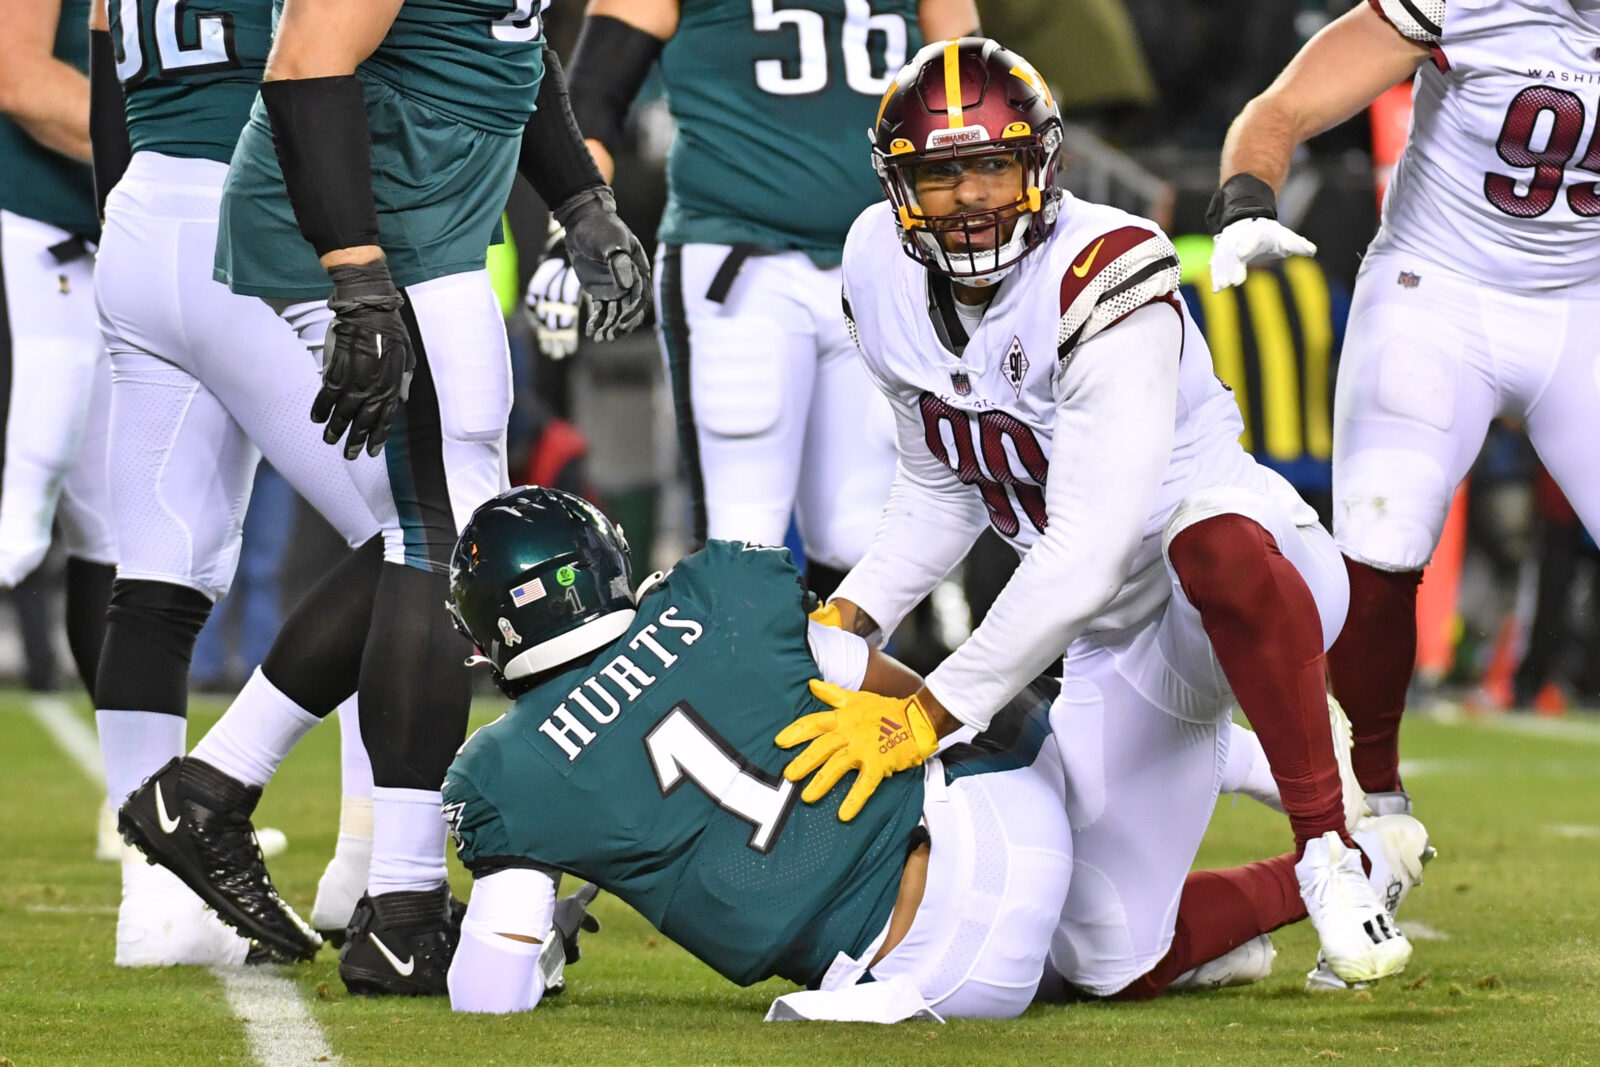 Philly’s Jittery Loss, Vikings National Attention, What to Do about the Kicker?